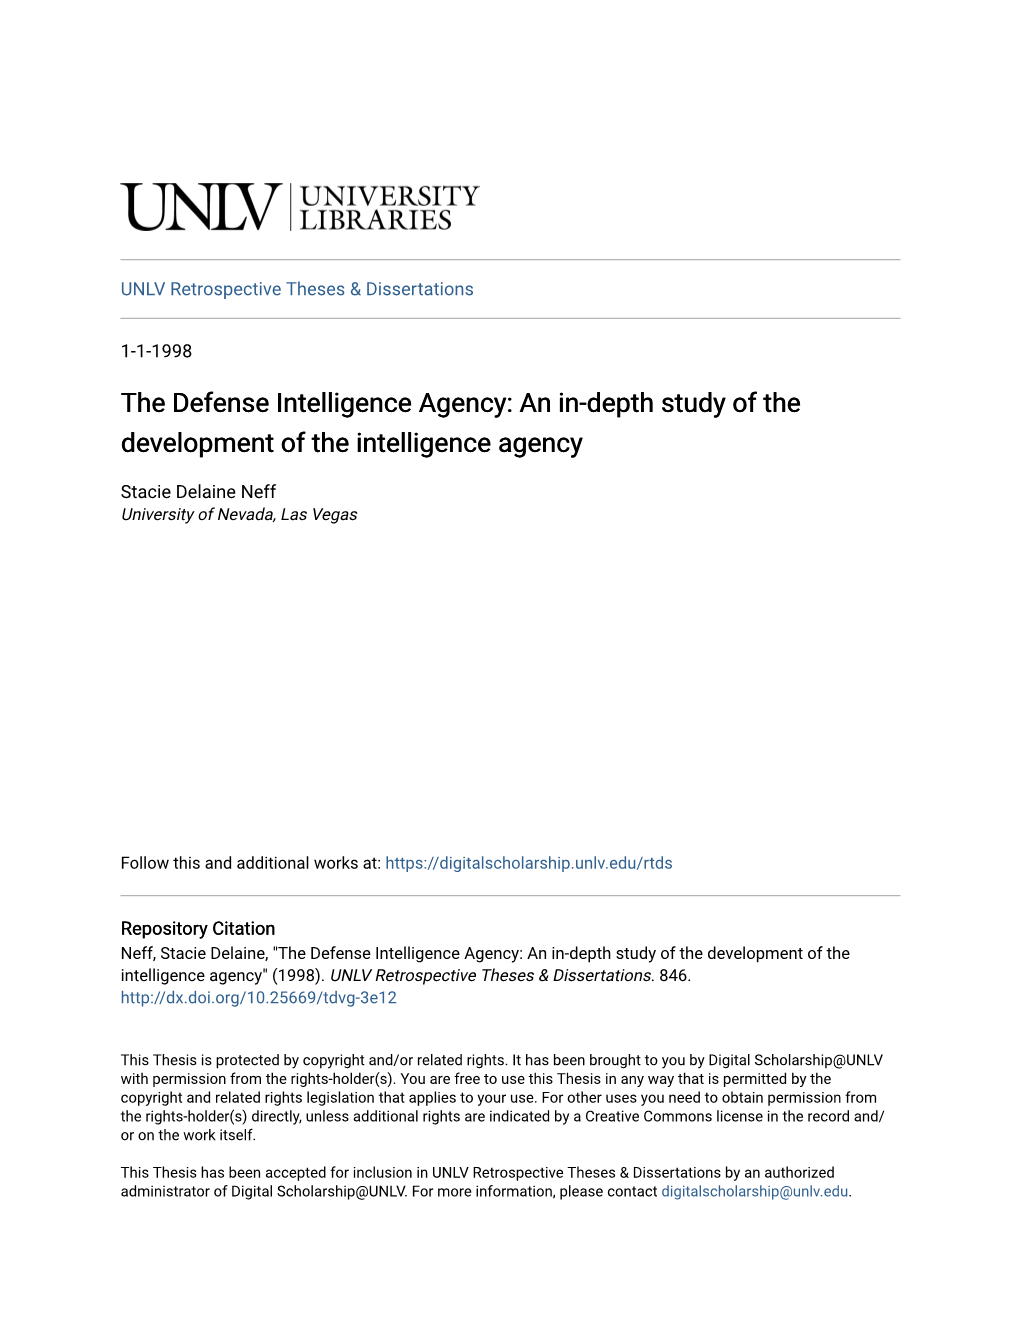 The Defense Intelligence Agency: an In-Depth Study of the Development of the Intelligence Agency